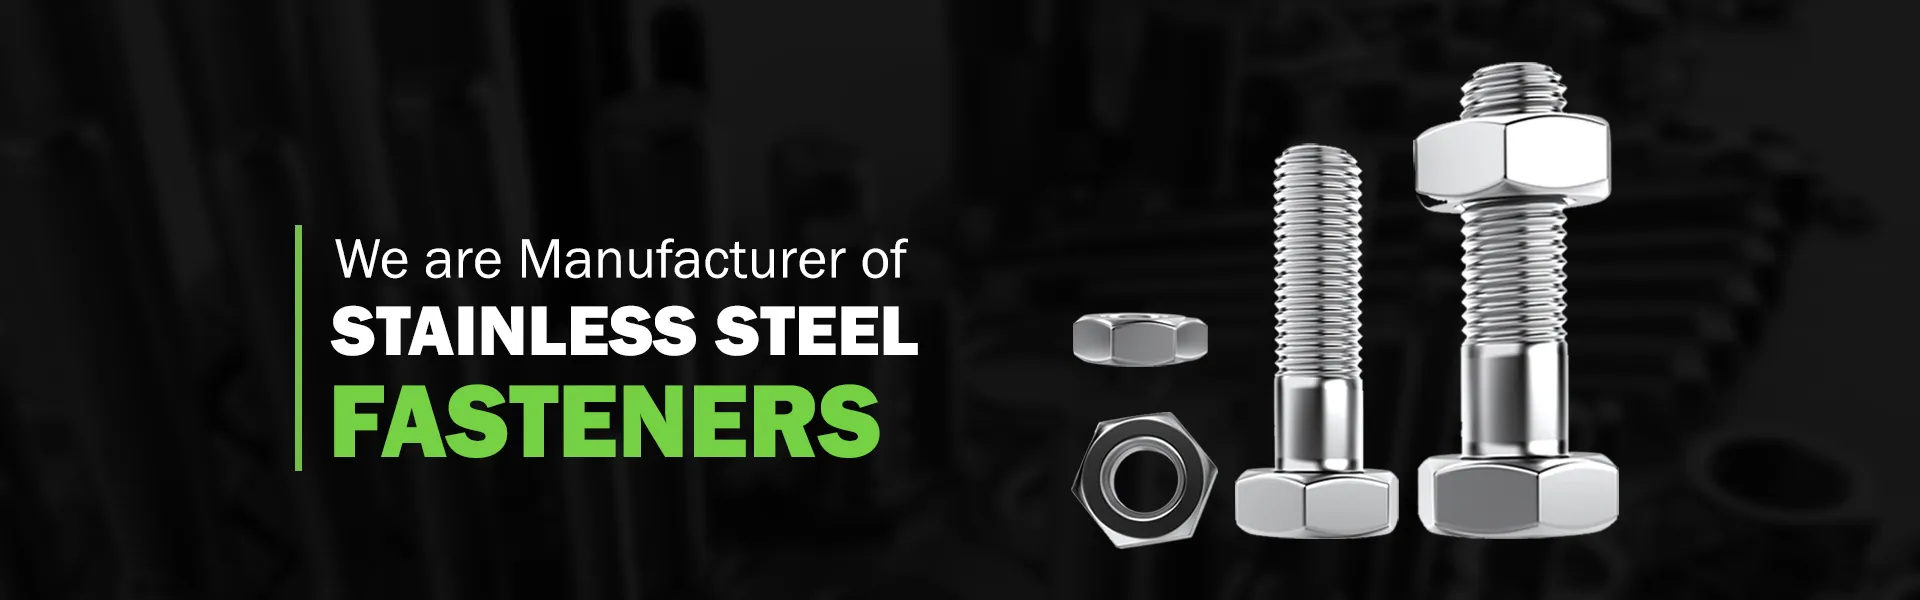 ss fasteners manufacturers and supplier in india